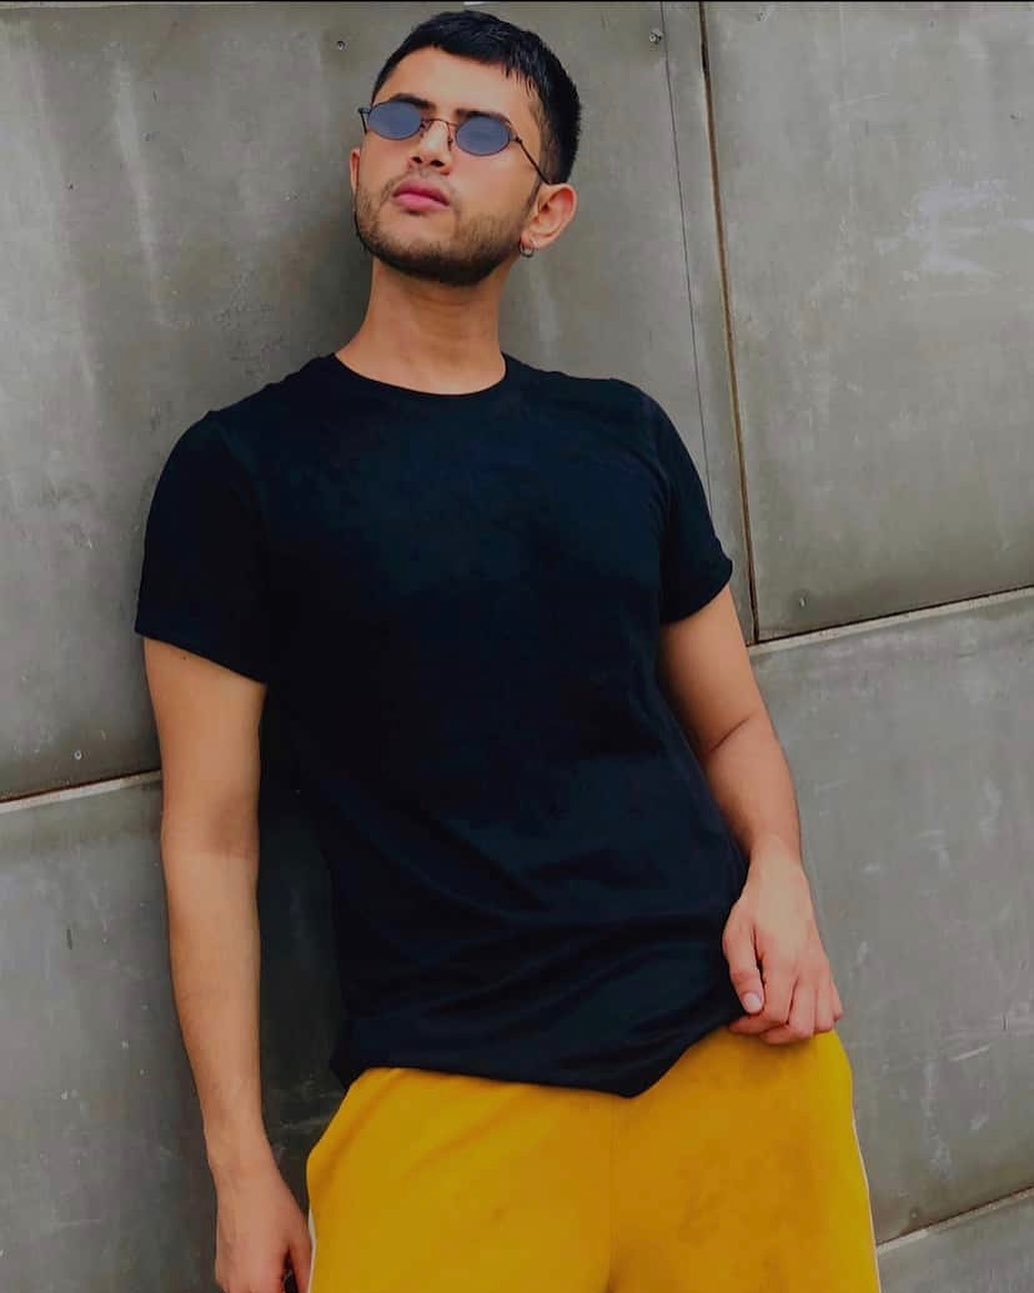 MYNTRA - Basic tees with pop colour trousers are what you need to ace this new season. Are you game?
📸 @urban.lad
Look up product code: 10360085 / 8418927 / 11351558
For more on-point looks, styling h...